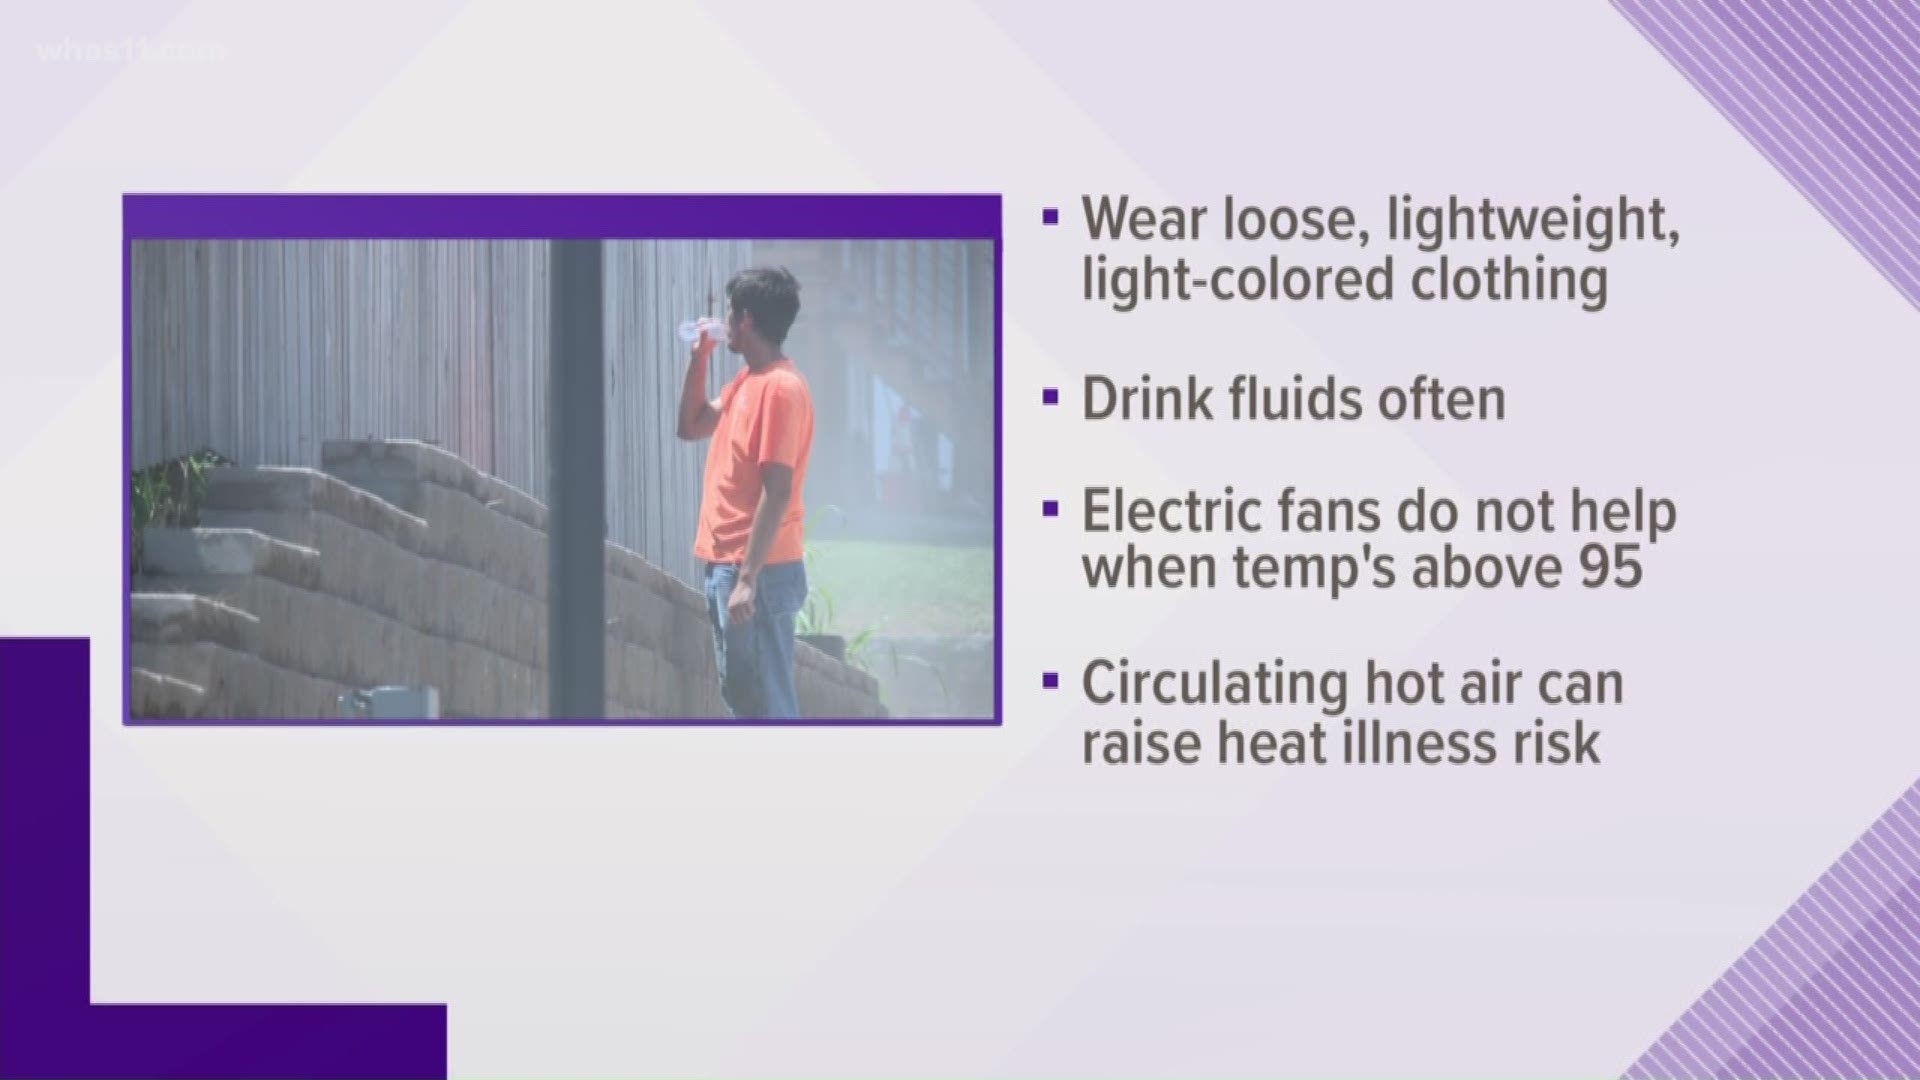 Heat exhaustion is a big warning sign from the body. Here are ways to beat the heat.